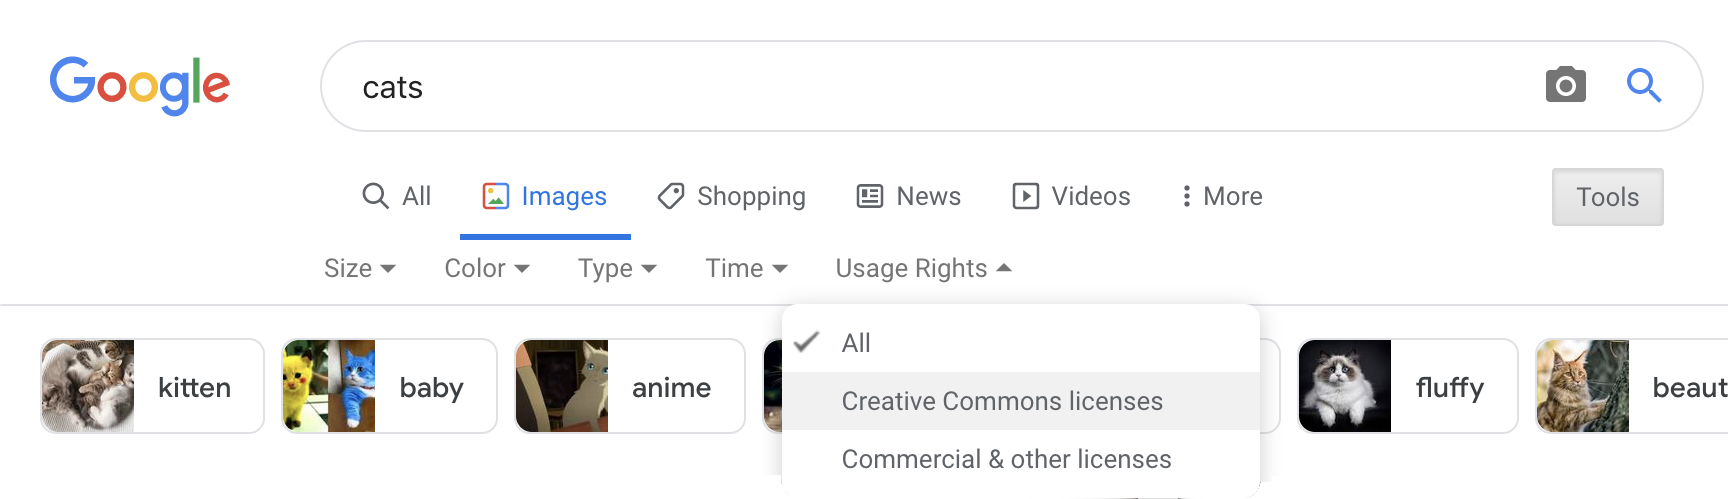 Screenshot of Google Images interface with Usage Rights selections open.